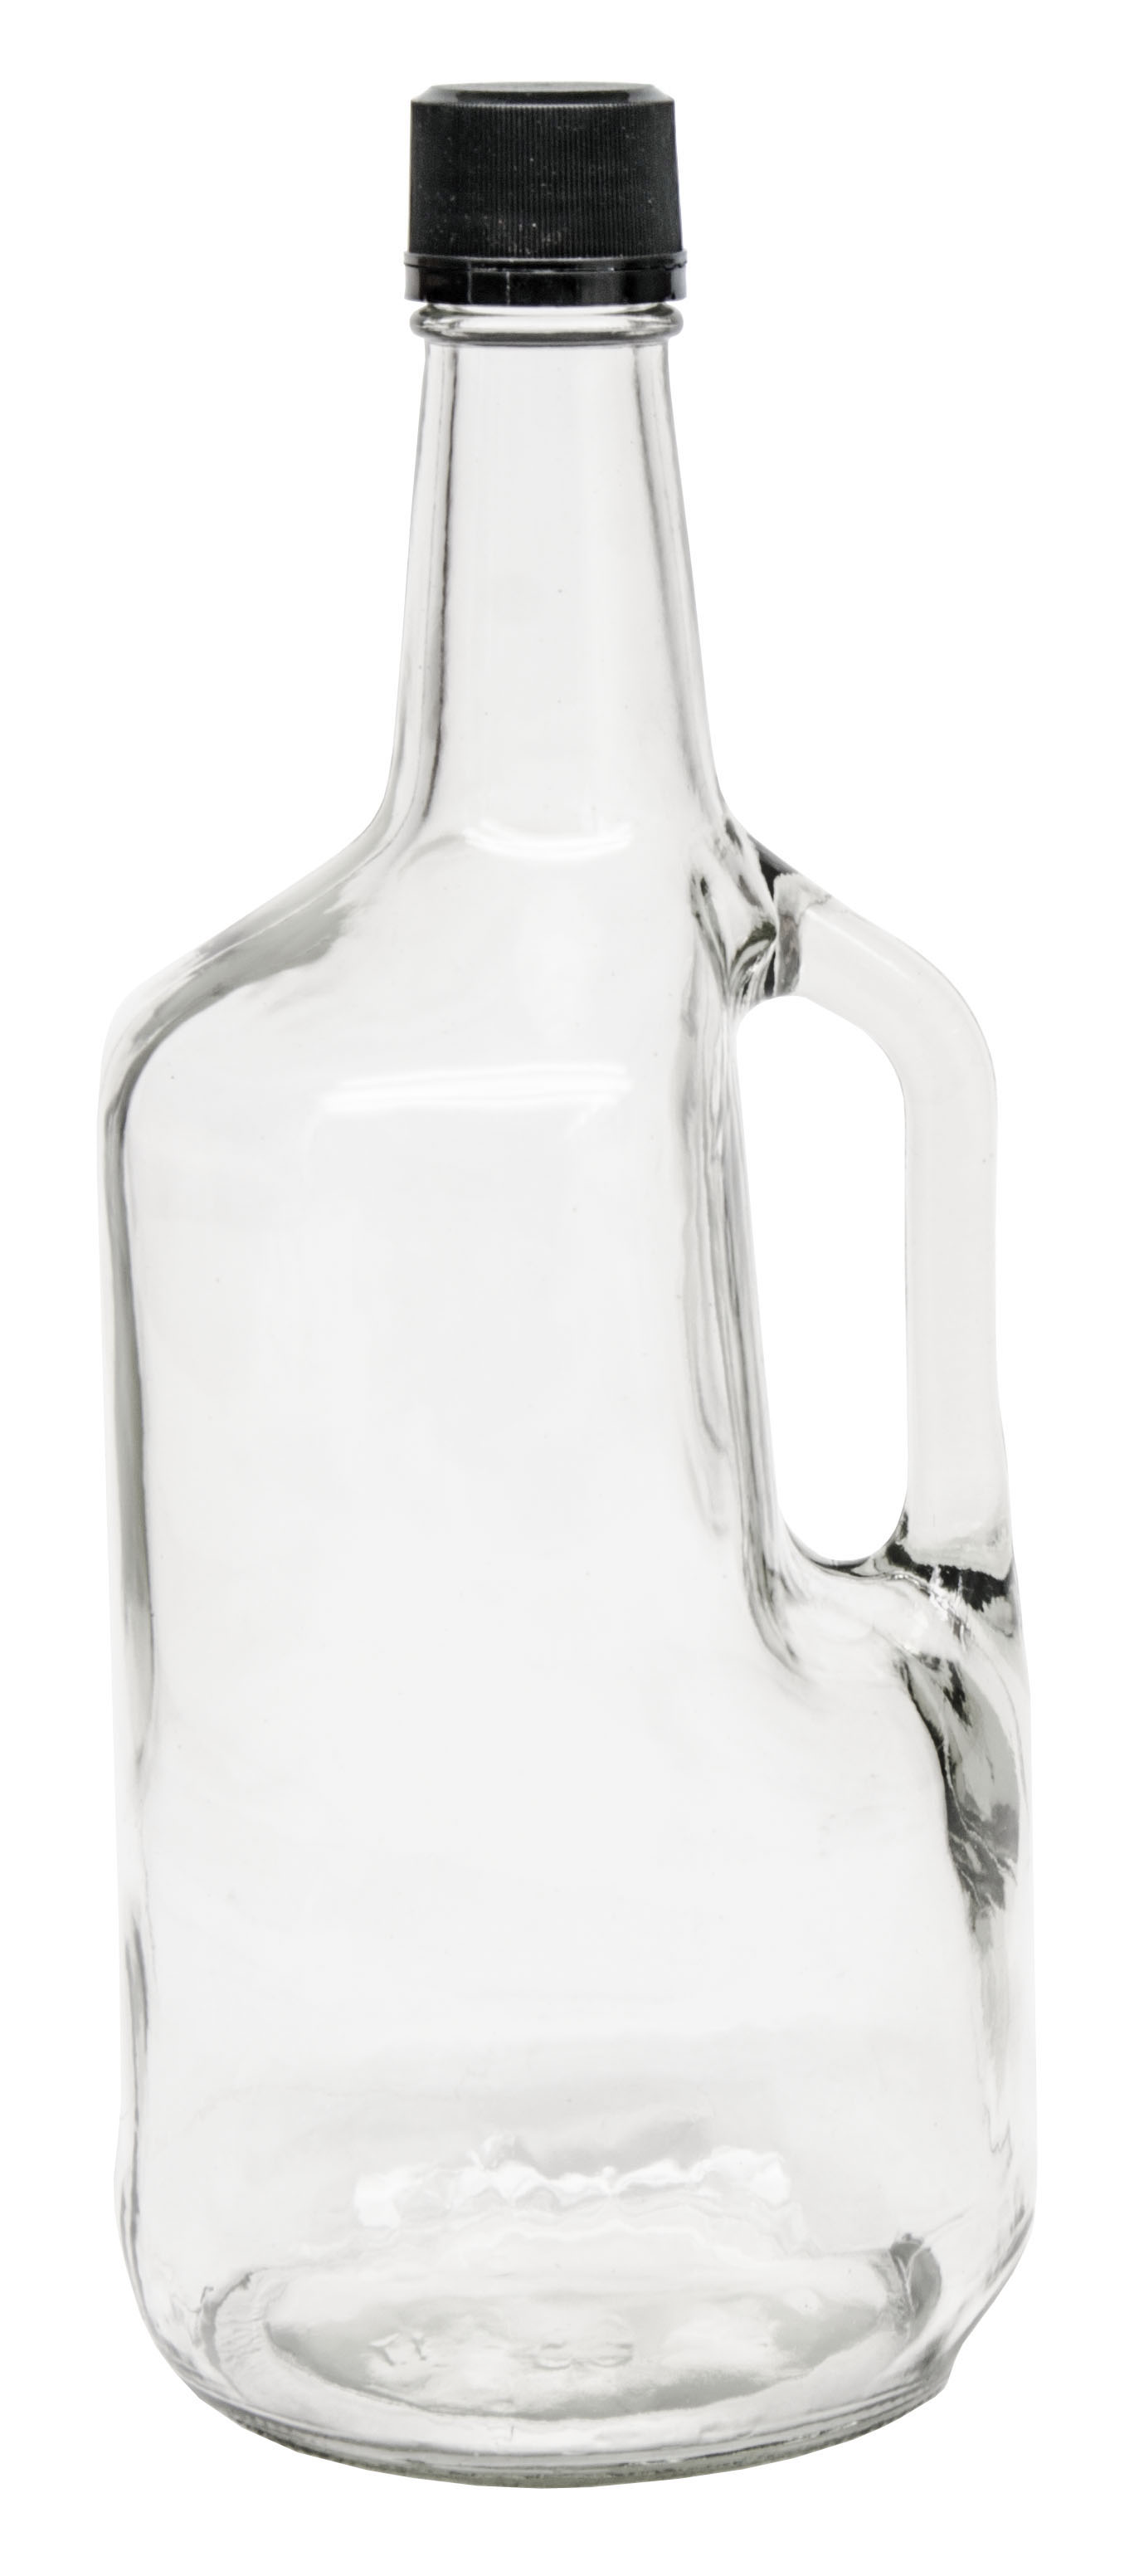 2 litre glass jug with lid